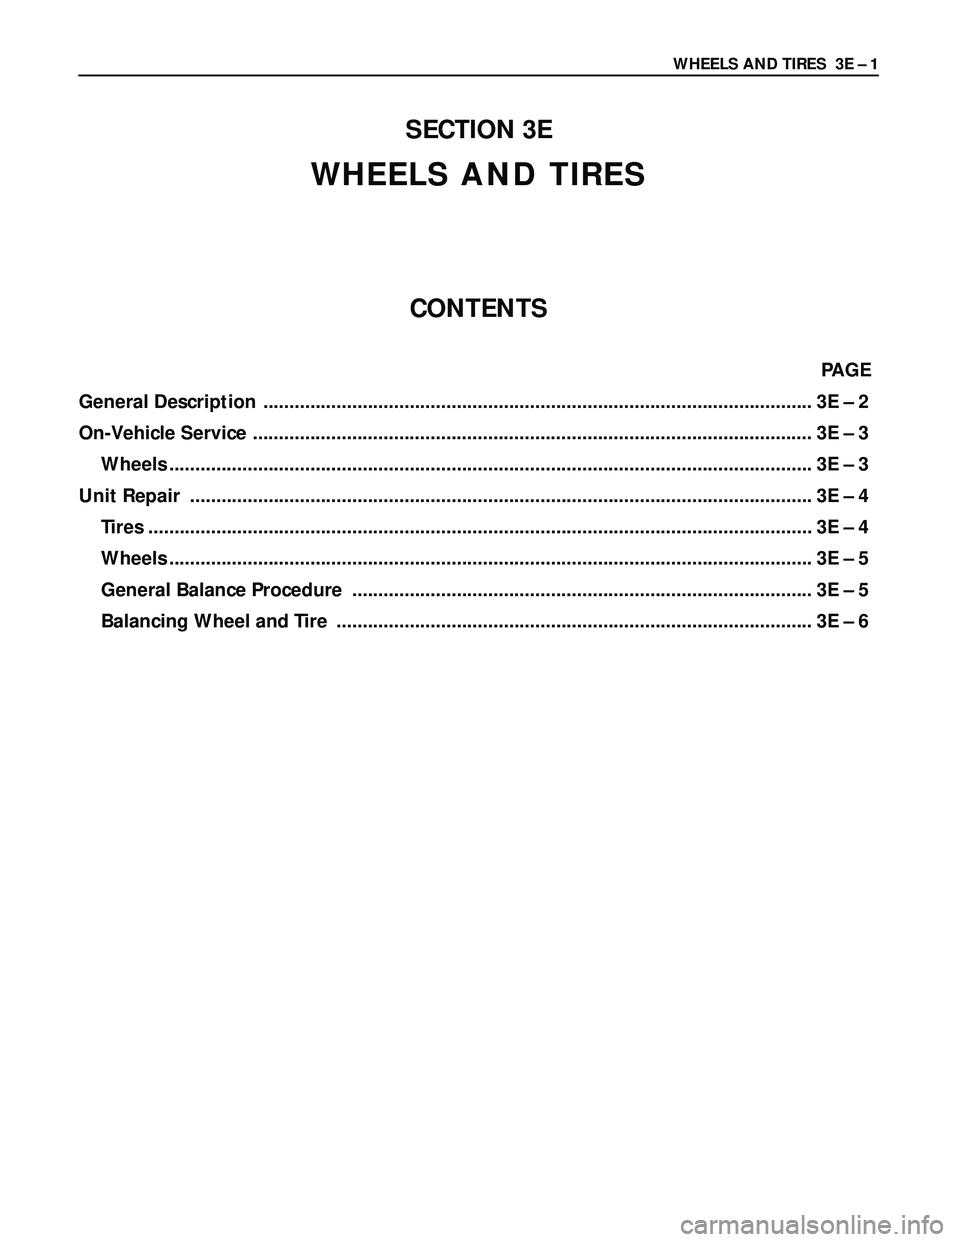 ISUZU TROOPER 1998  Service Owners Manual WHEELS AND TIRES  3E – 1
SECTION 3E
WHEELS AND TIRES
CONTENTS
PAGE
General Description  ......................................................................................................... 3E �